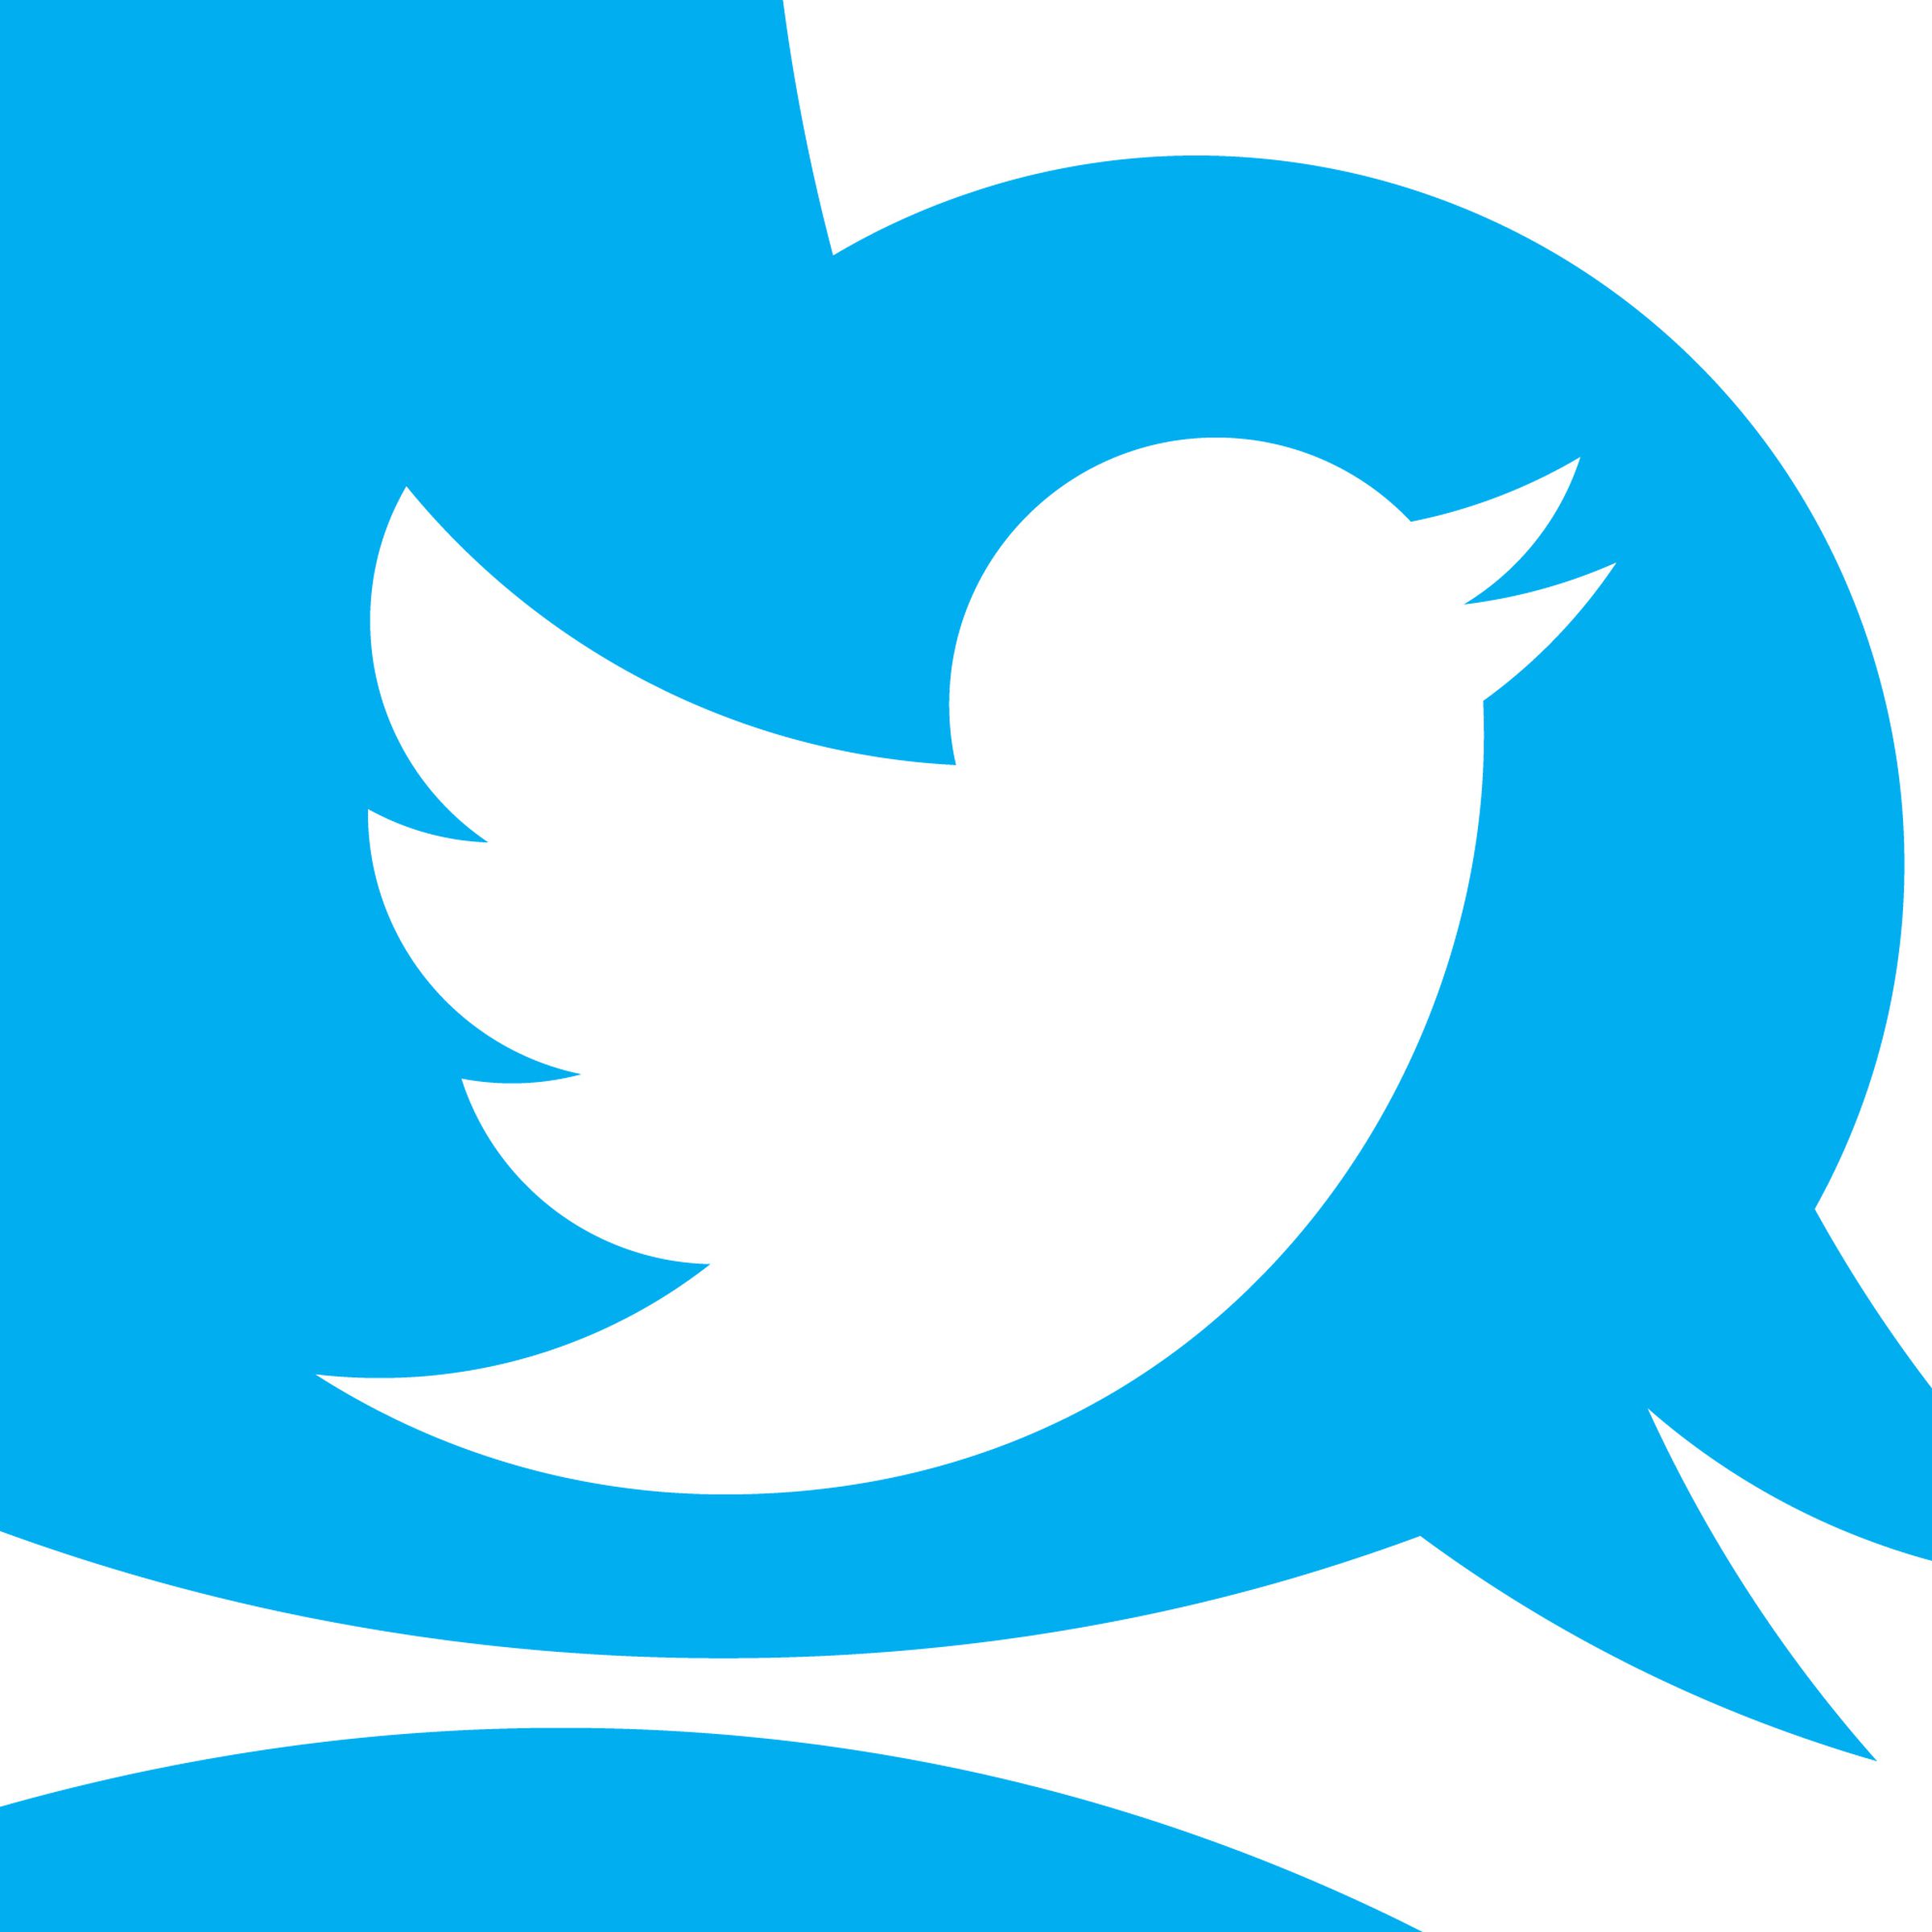 An image showing Twitter’s logo inside of another Twitter logo